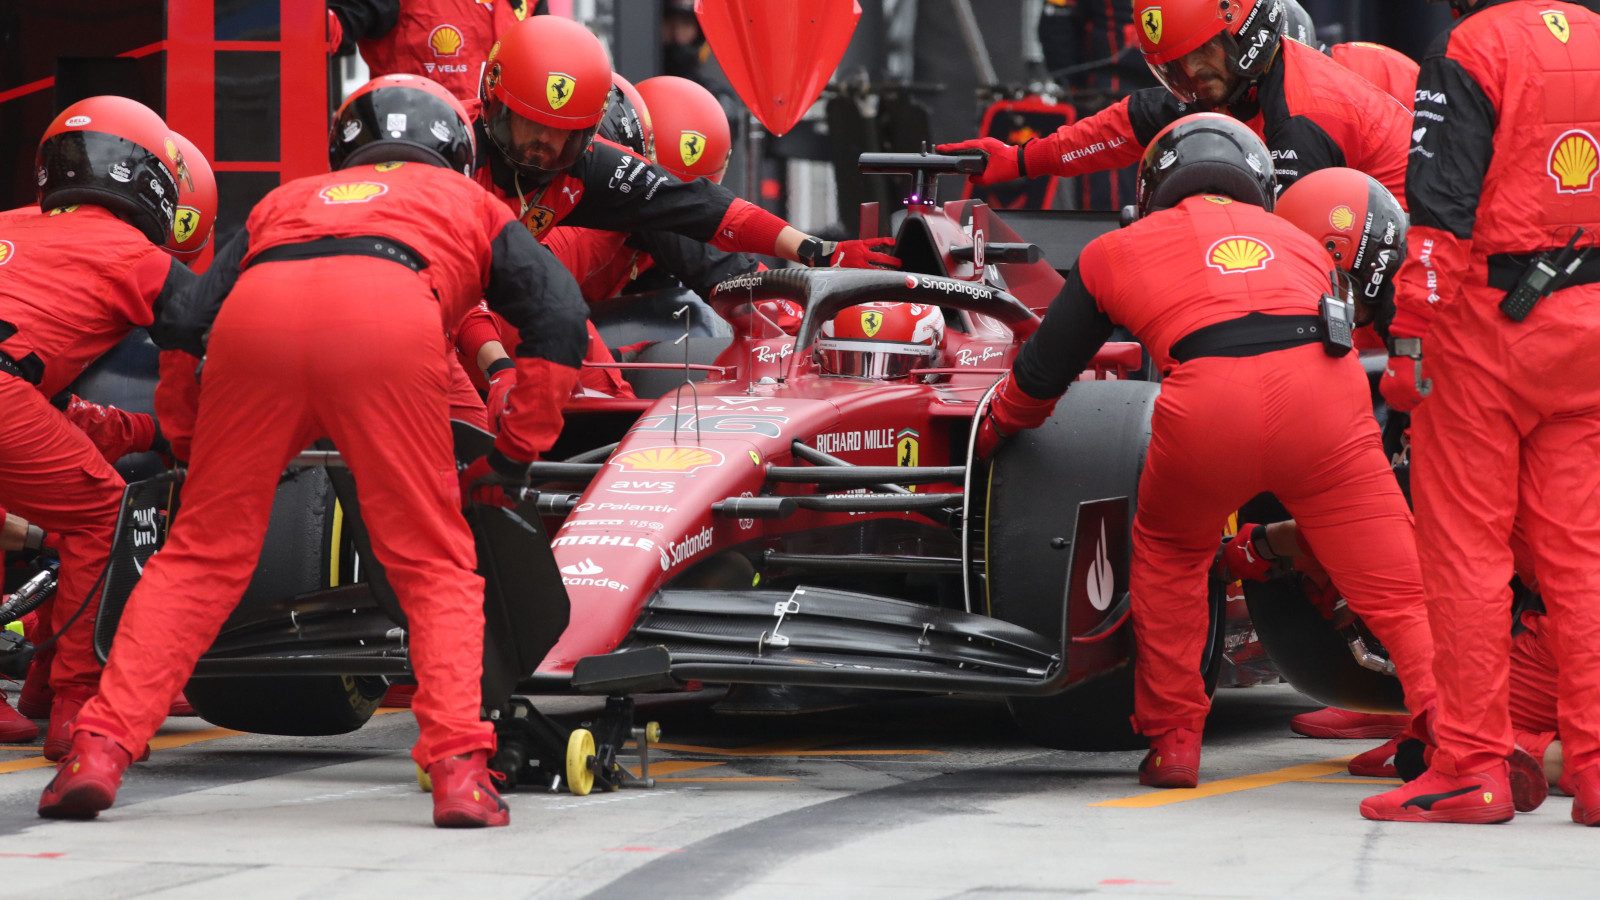 A pit stop for Ferrari driver Charles Leclerc with medium tyres. Hungary July 2022